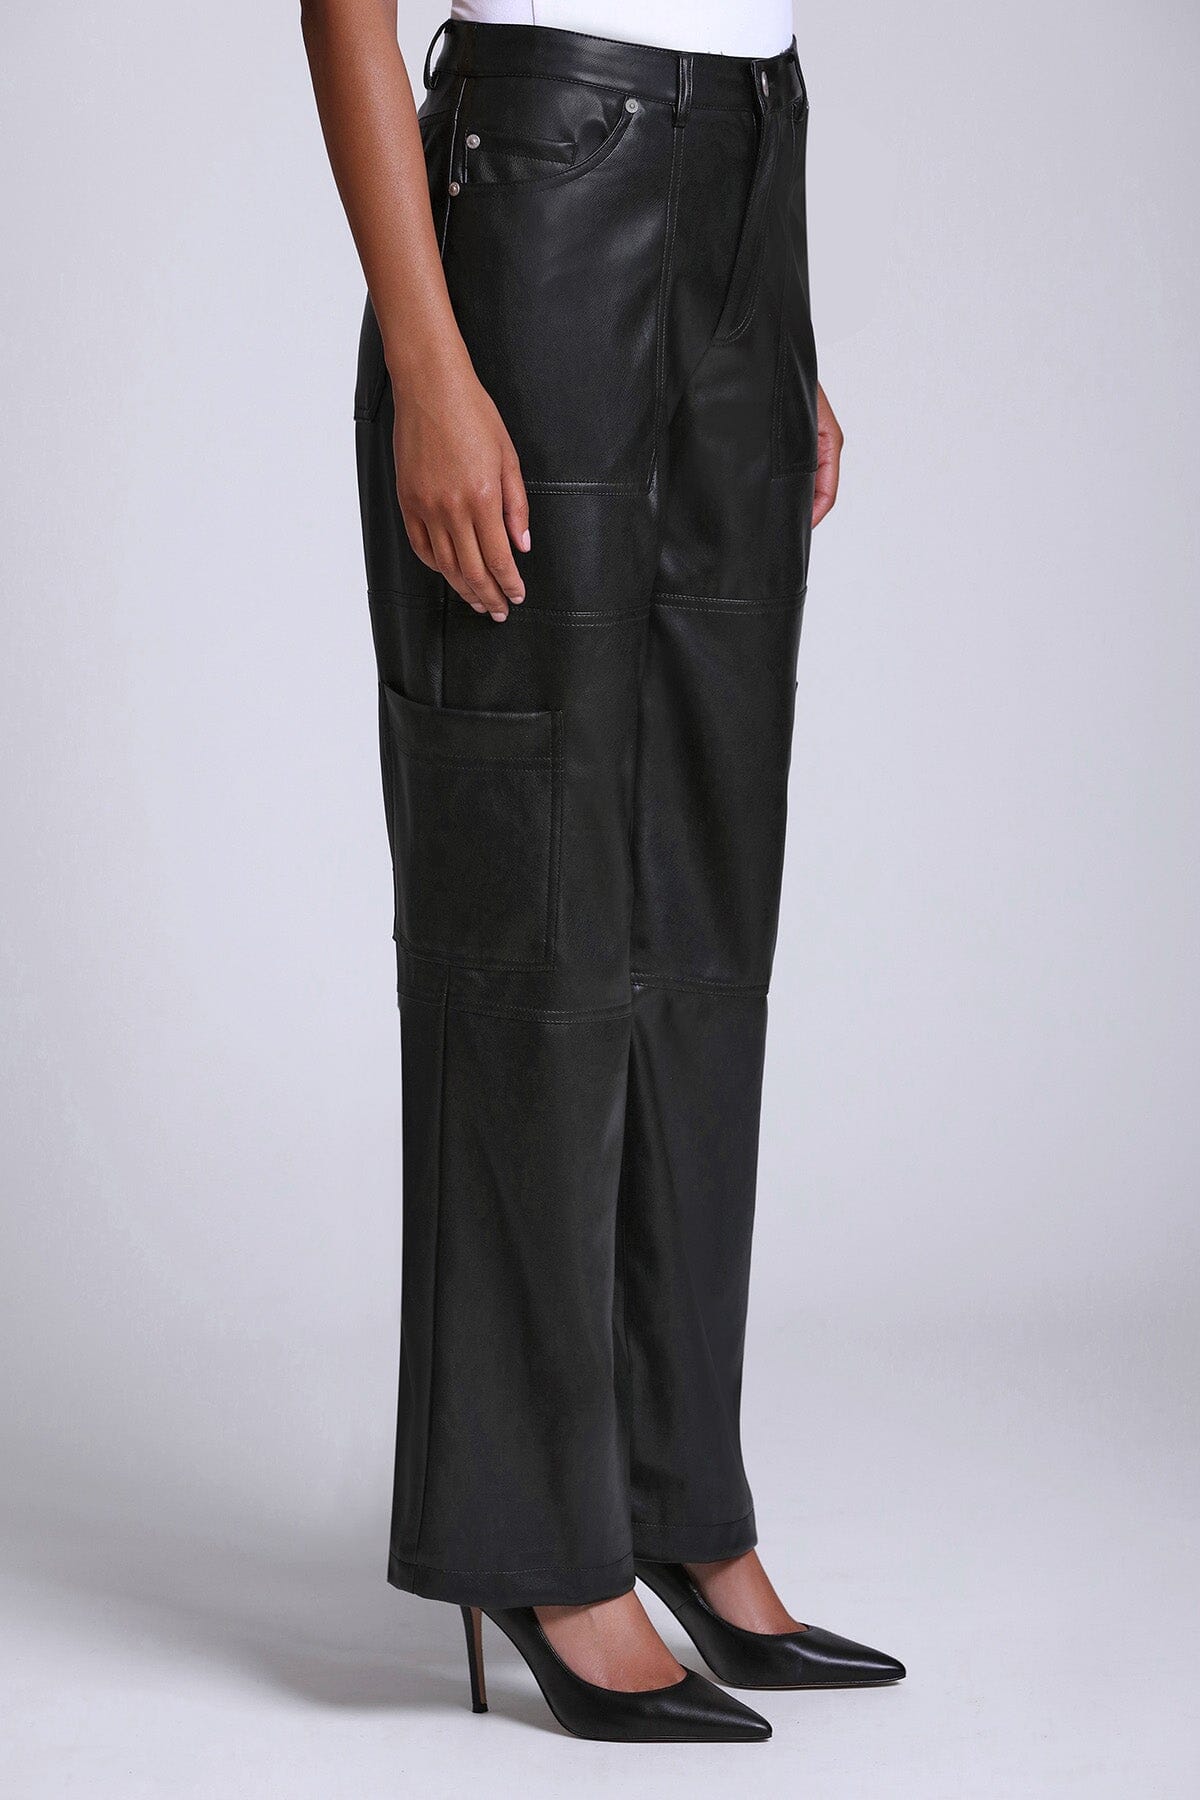 black faux ever leather wide leg cargo pant - figure flattering designer fashion office to date night pants for women